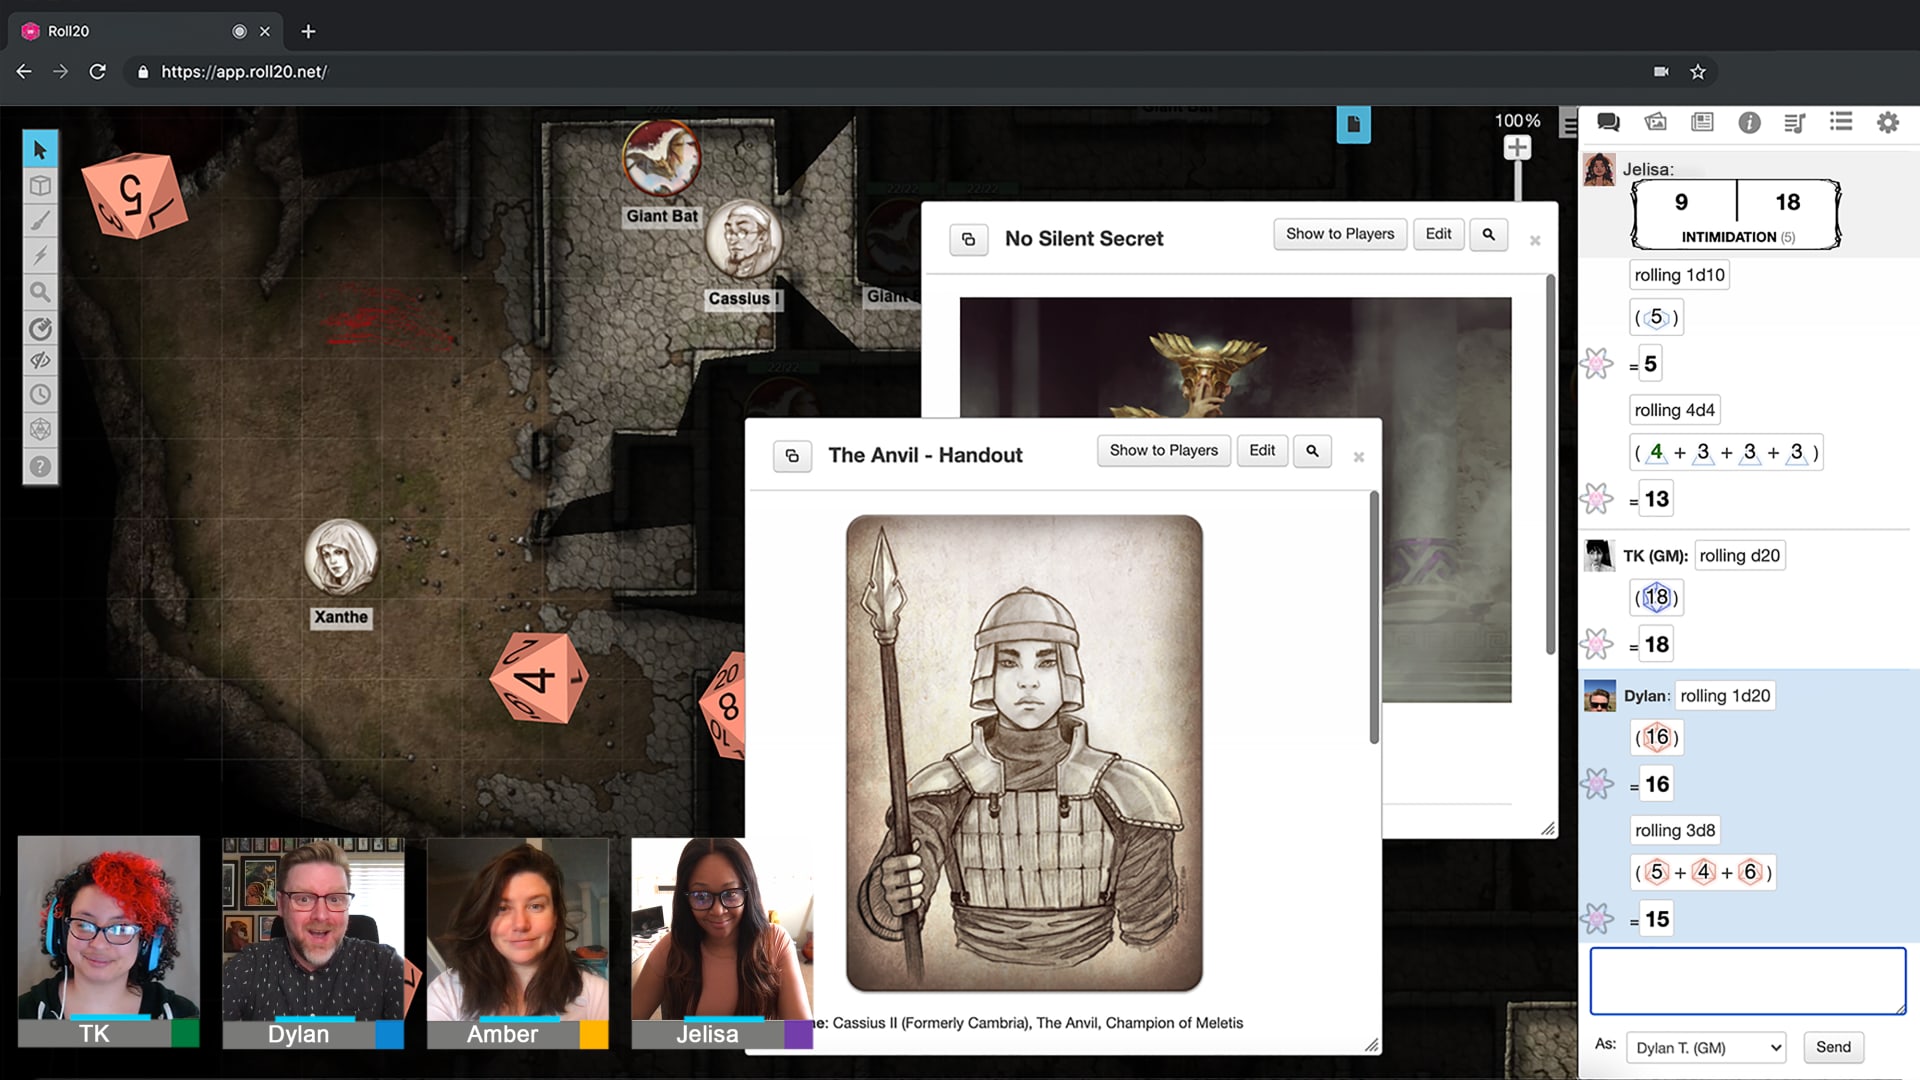 A screenshot of Dungeons & Dragons gameplay on Roll20.